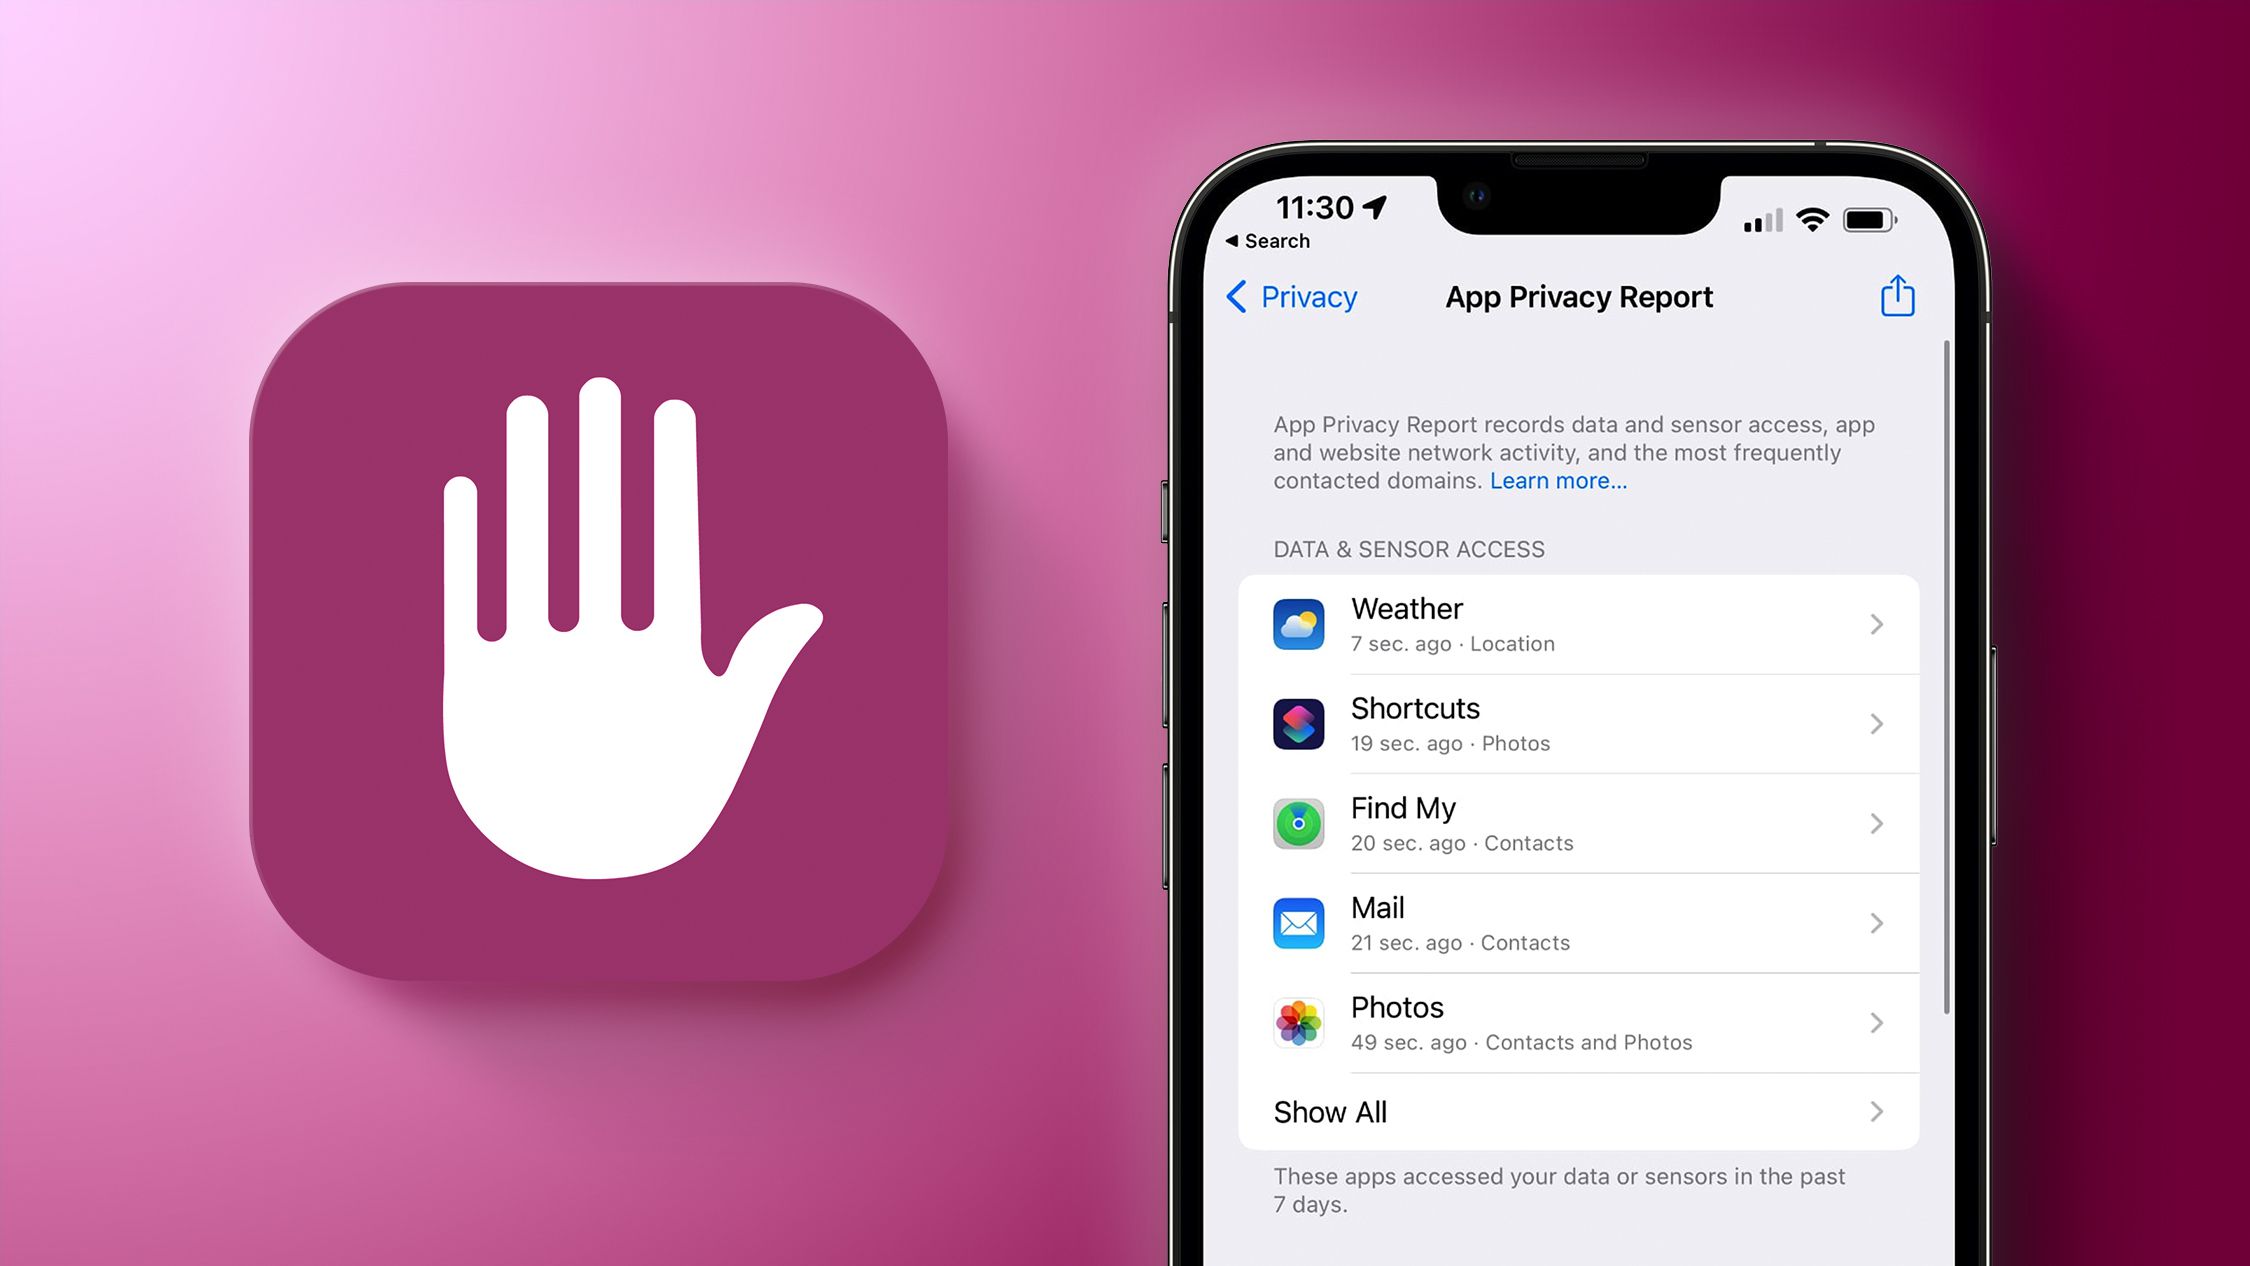 How to Use App Privacy Report in the iOS 15.2 Beta - MacRumors